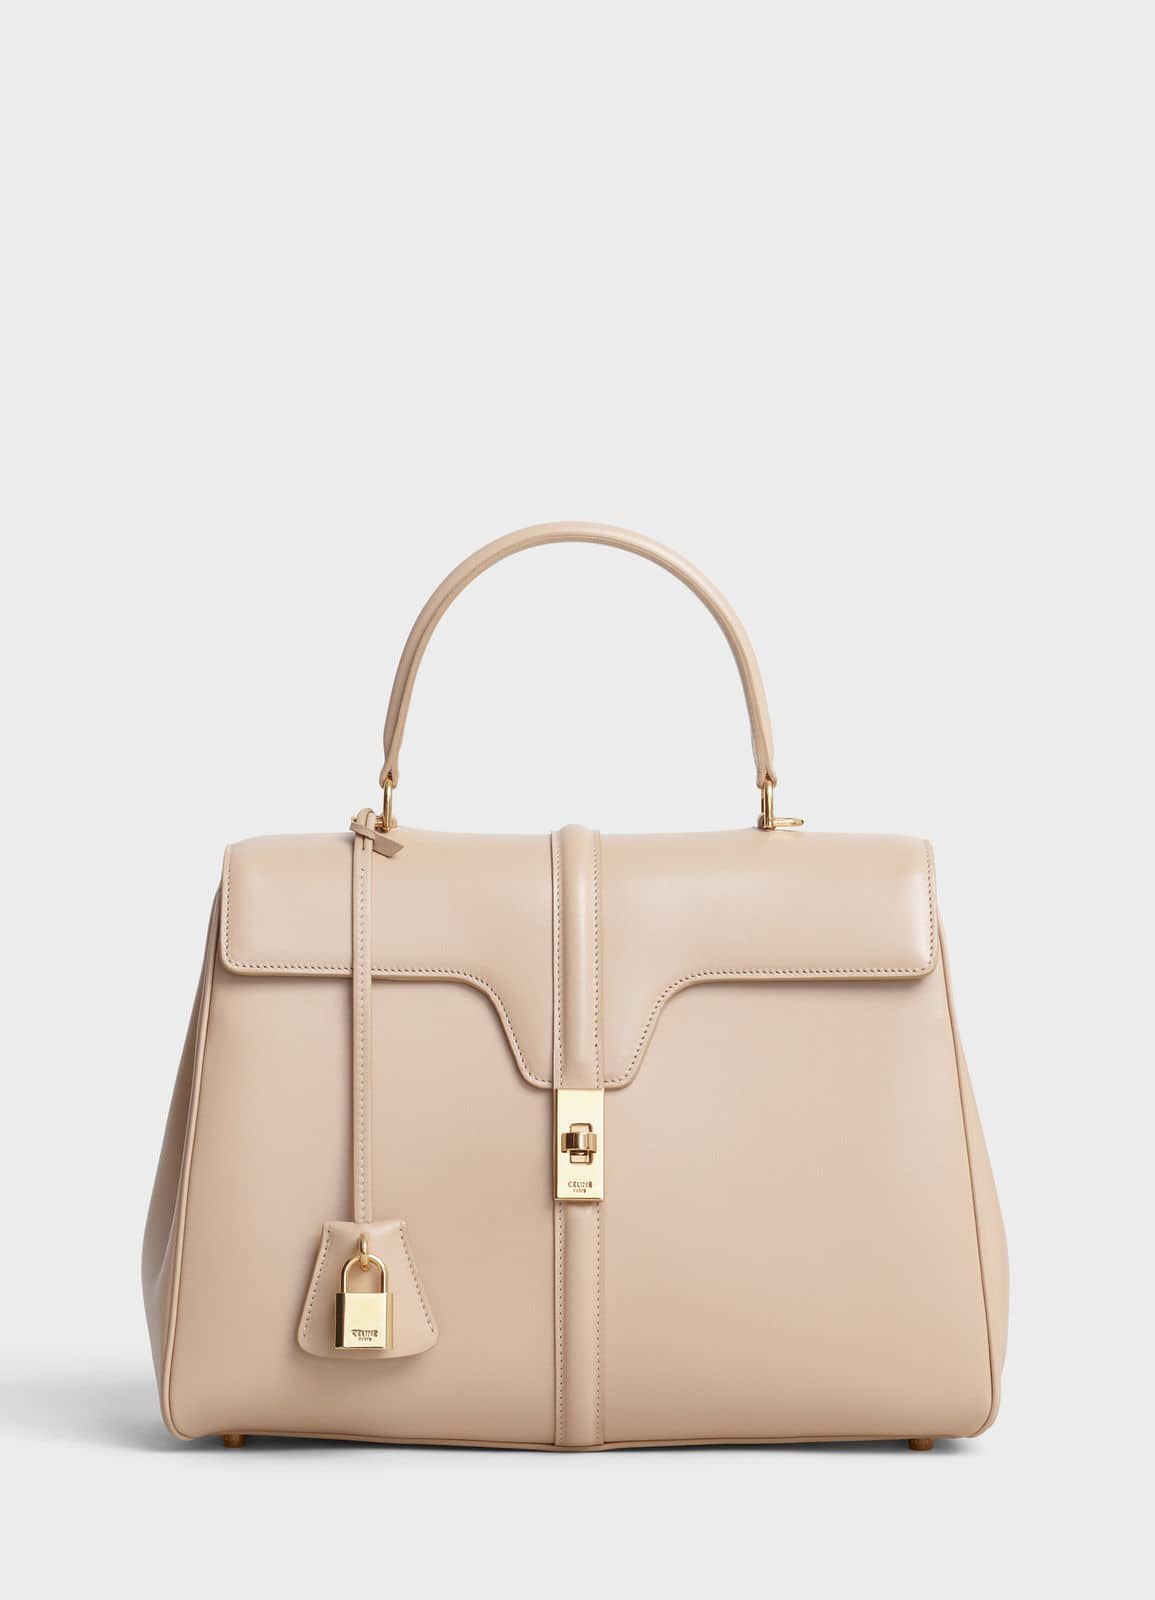 Celine Trio Crossbody Bag Reference Guide - Spotted Fashion